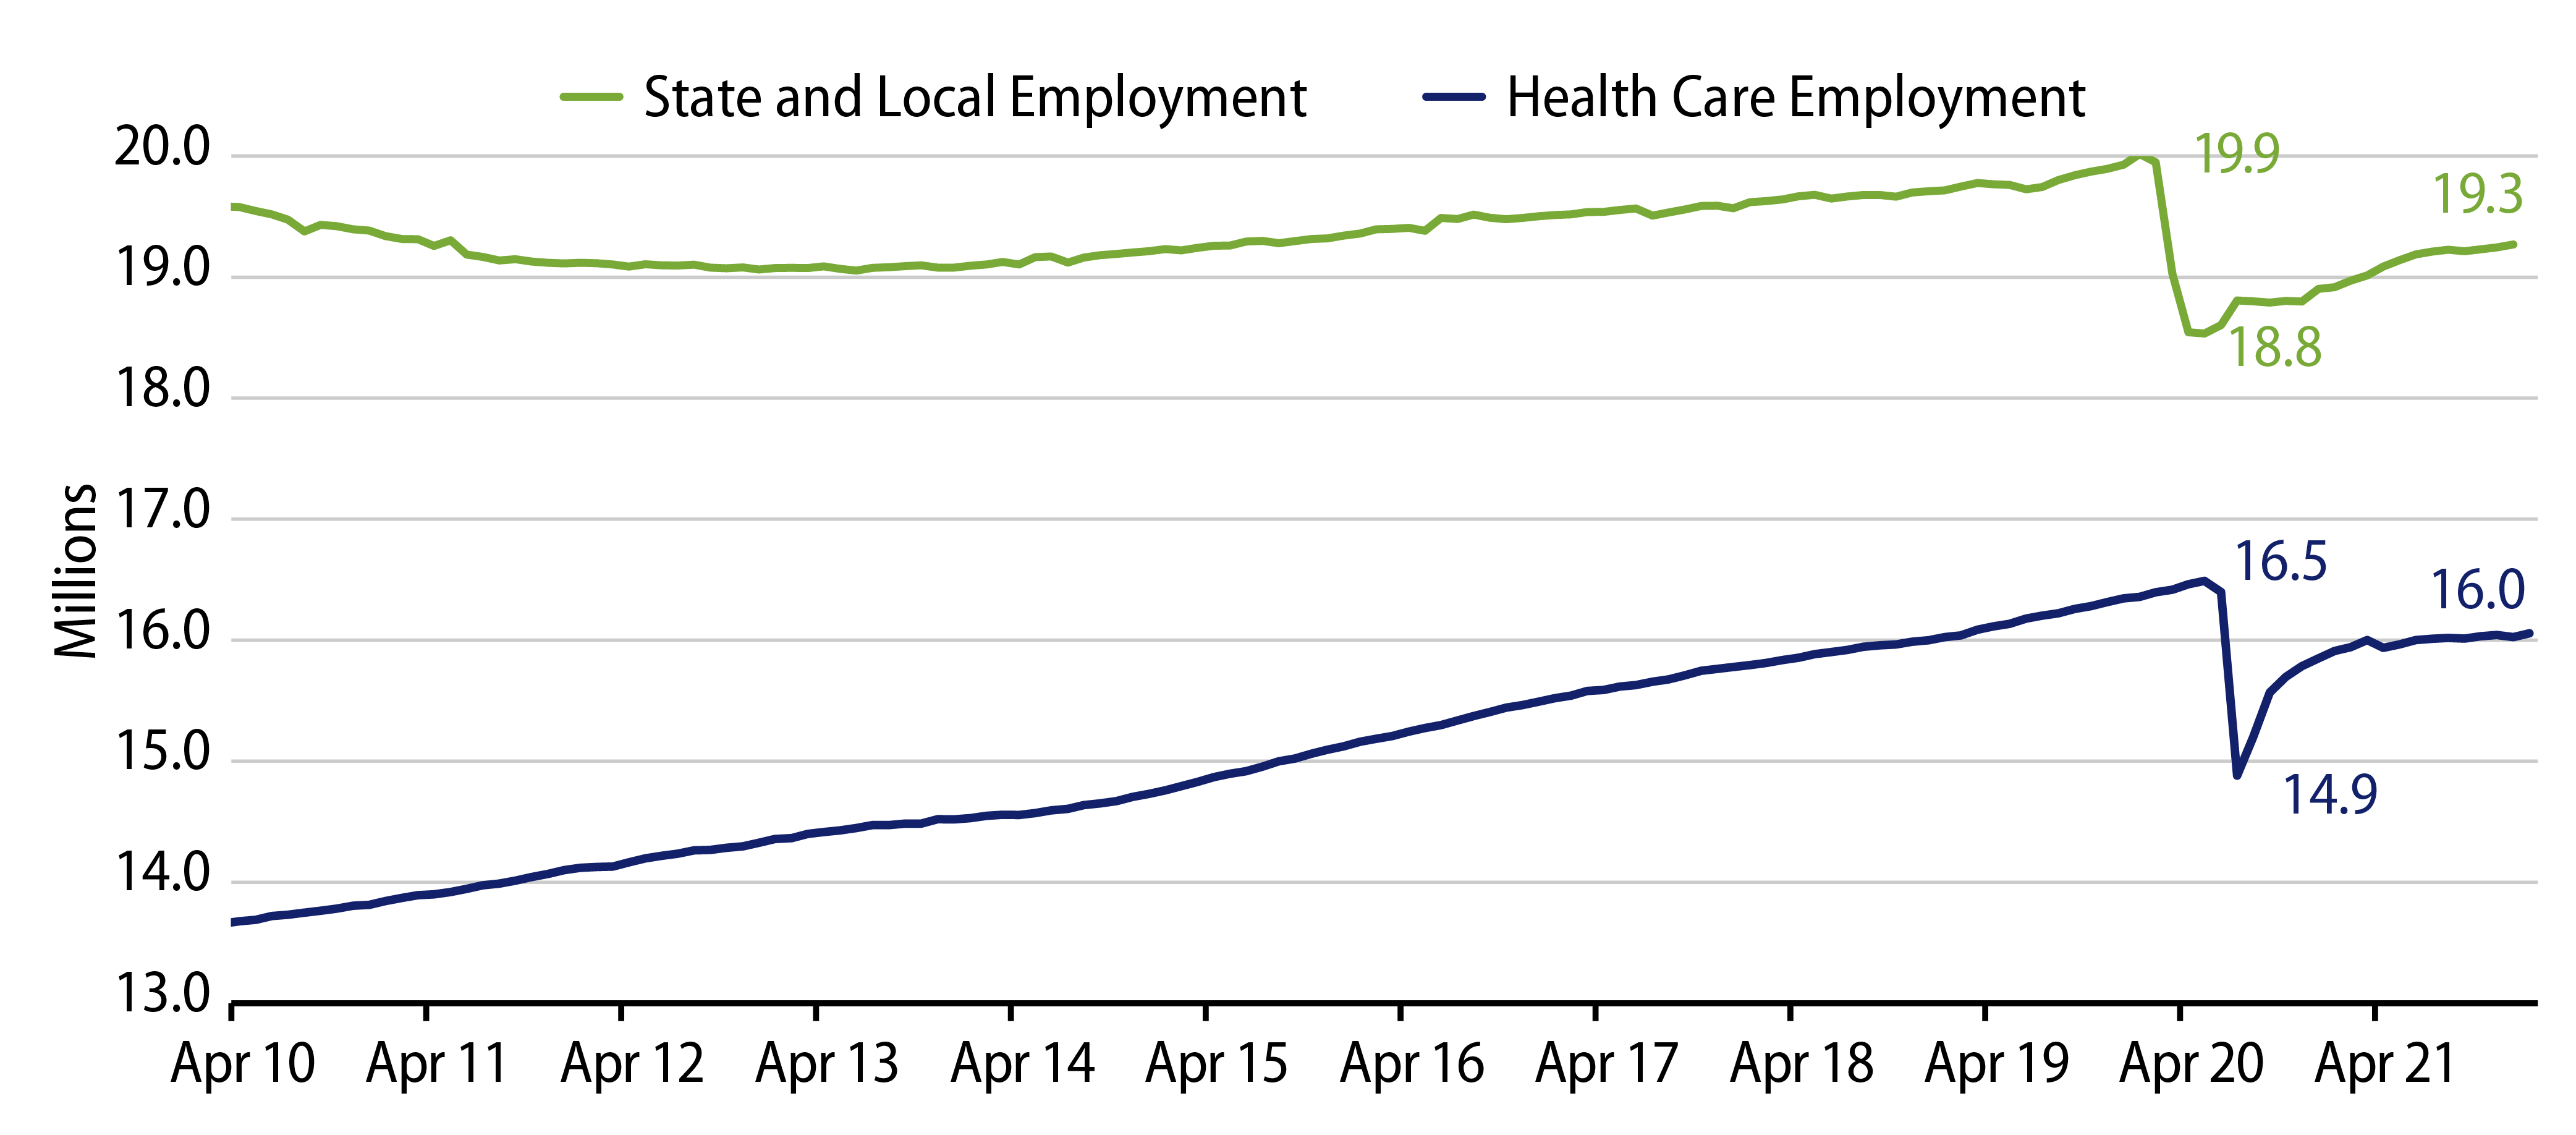 State and Local Employment vs. Health Care Employment